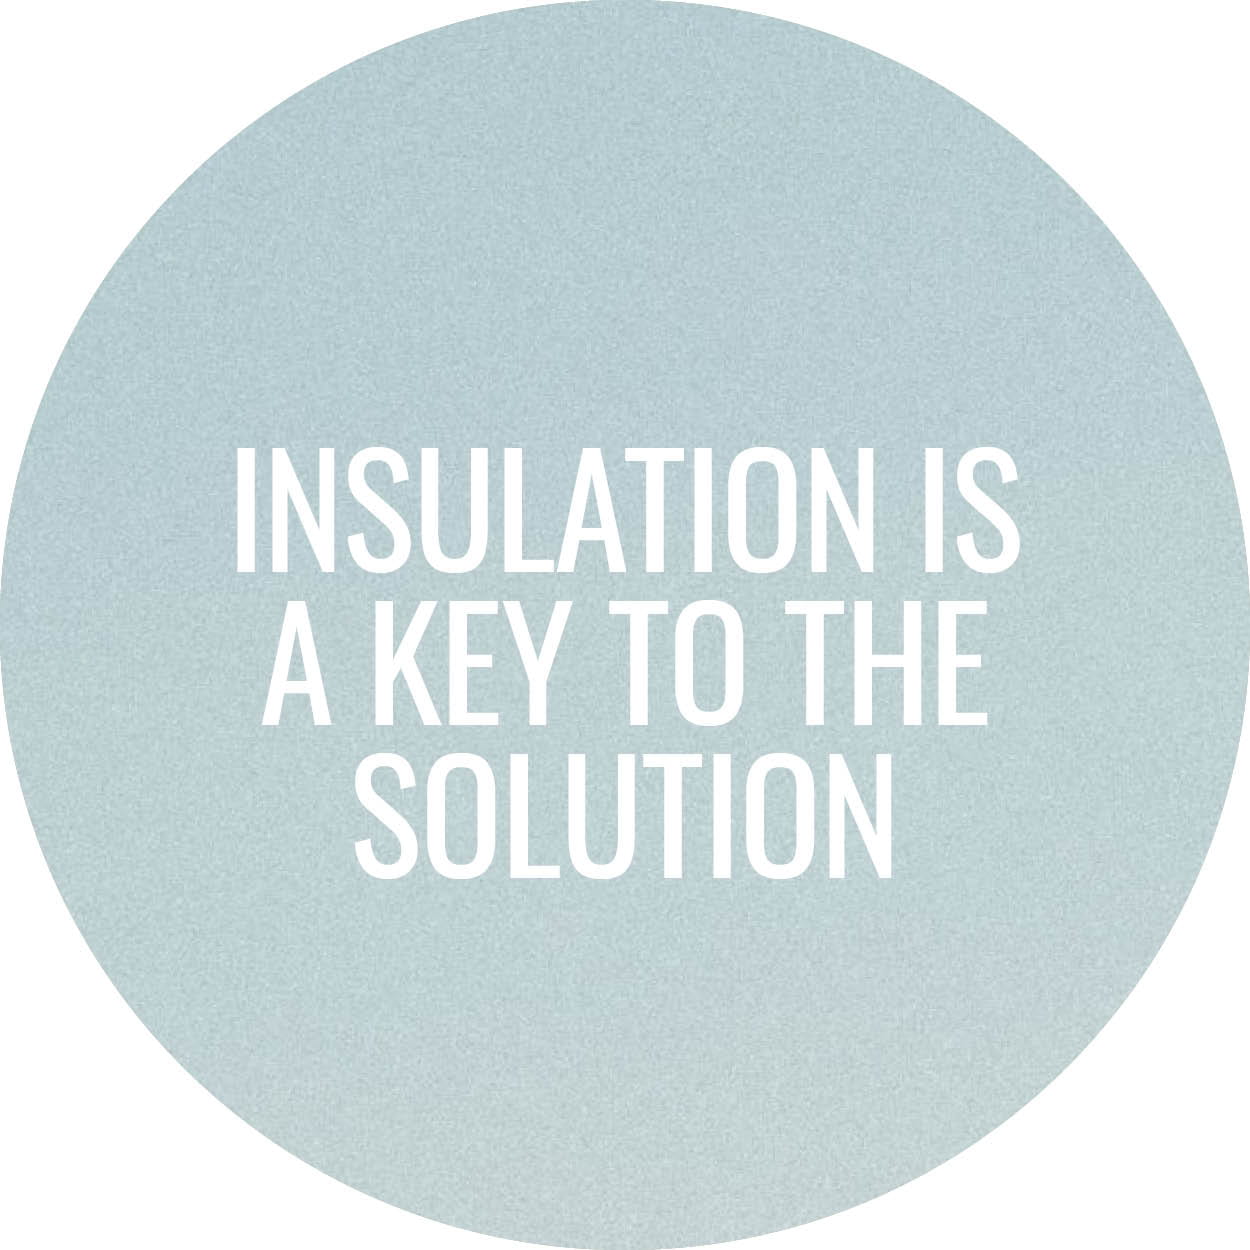 Insulation is a key to the solution